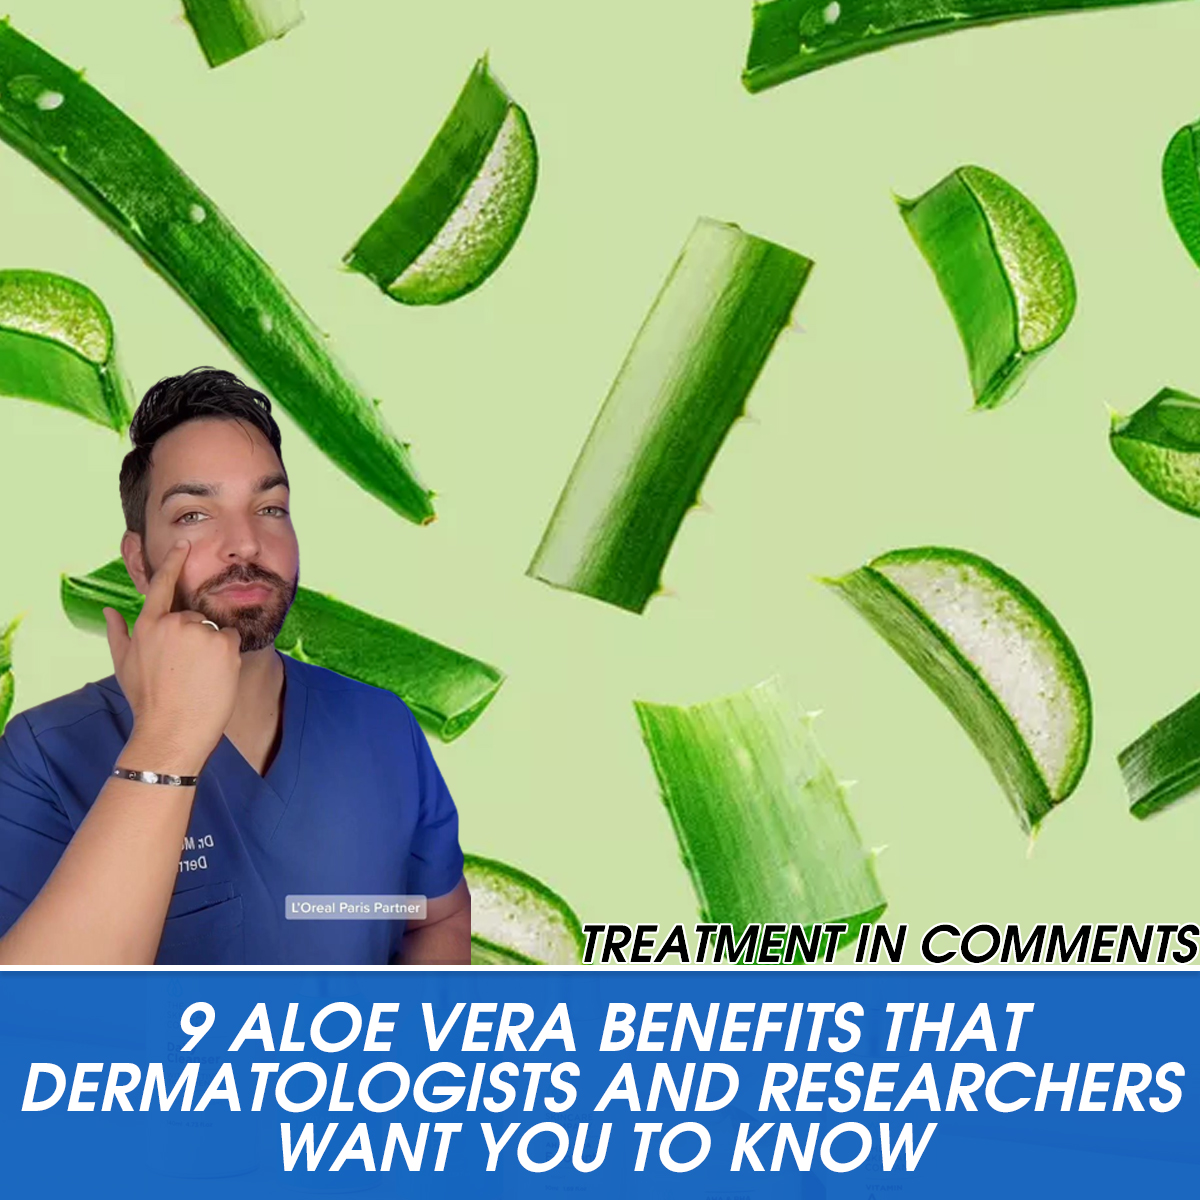 9 Aloe Vera Benefits That Dermatologists and Researchers Want You to Know